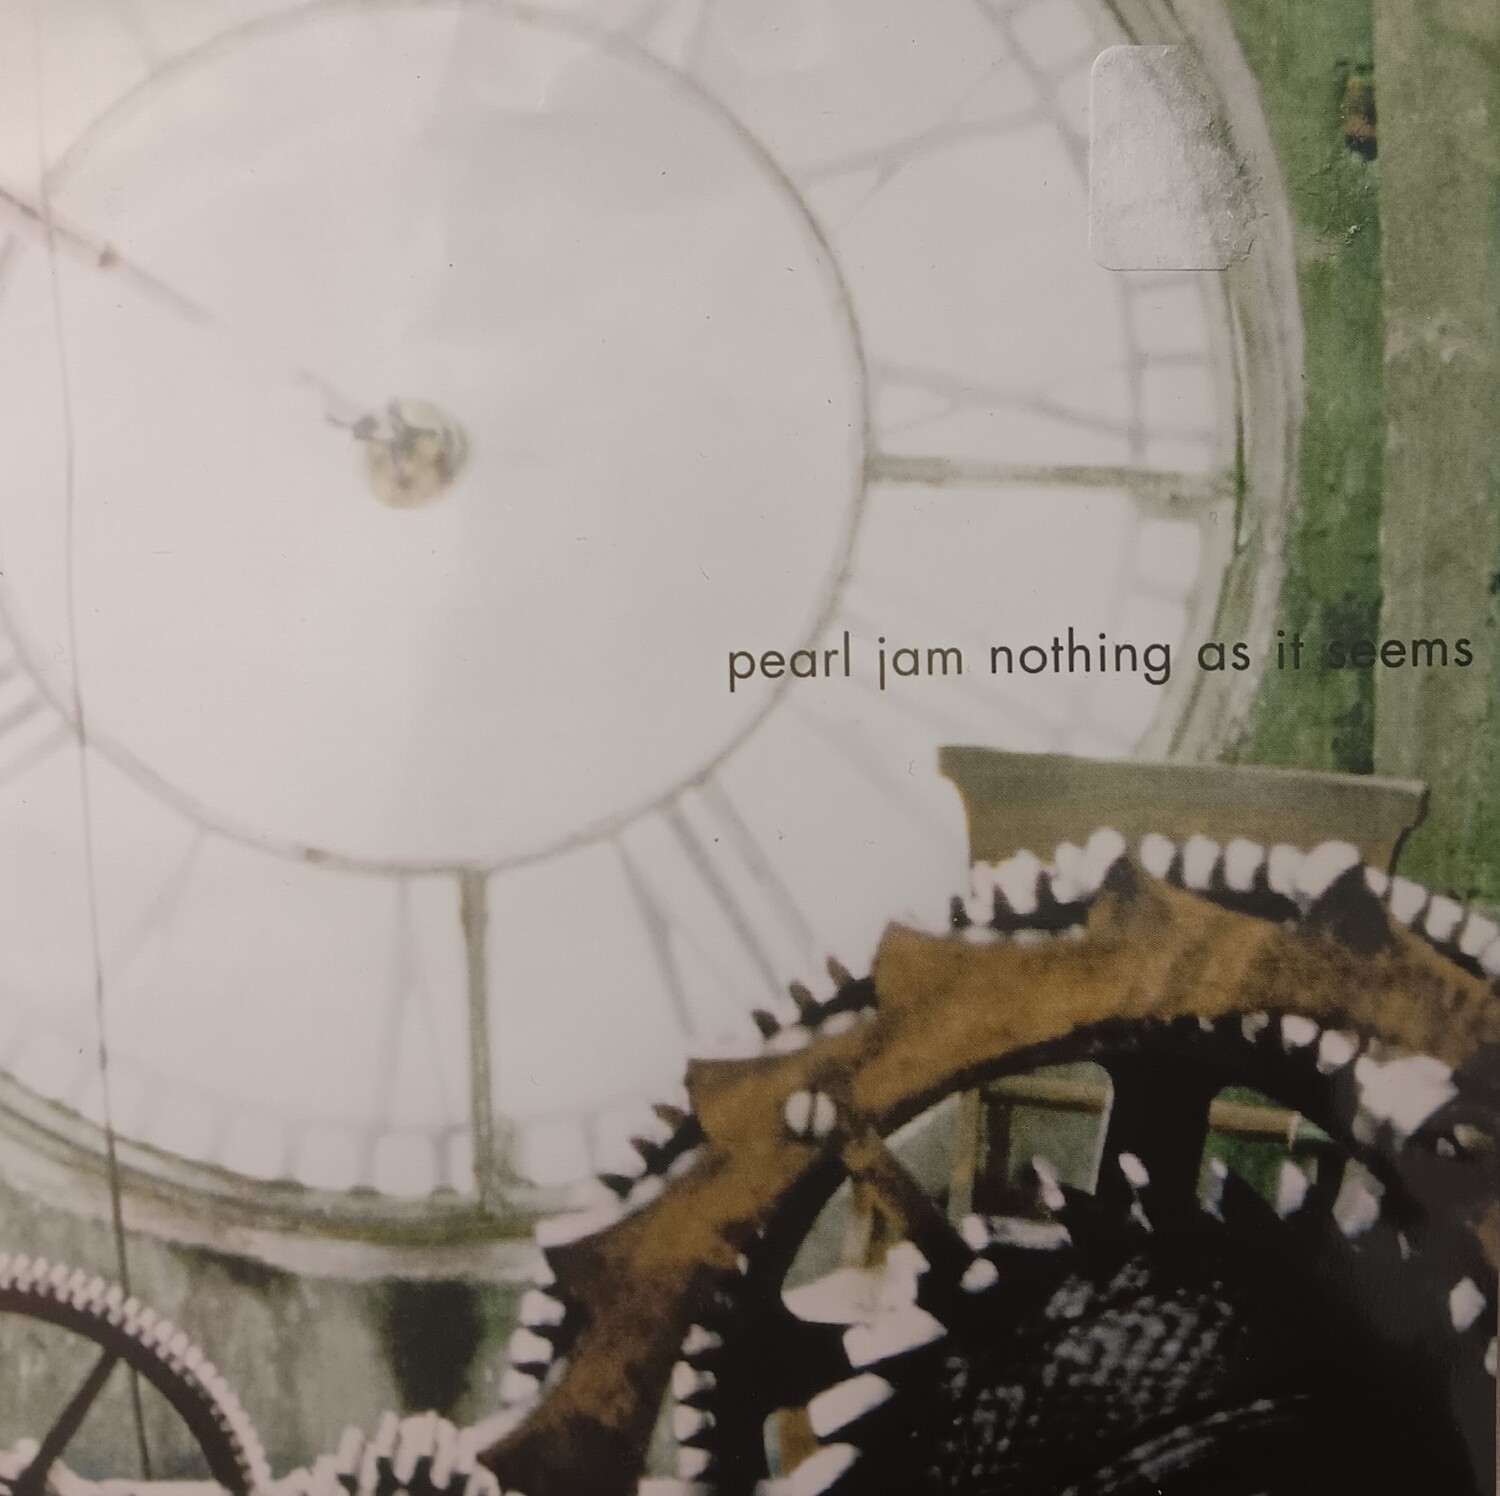 PEARL JAM - Nothing as it seems (45RPM)